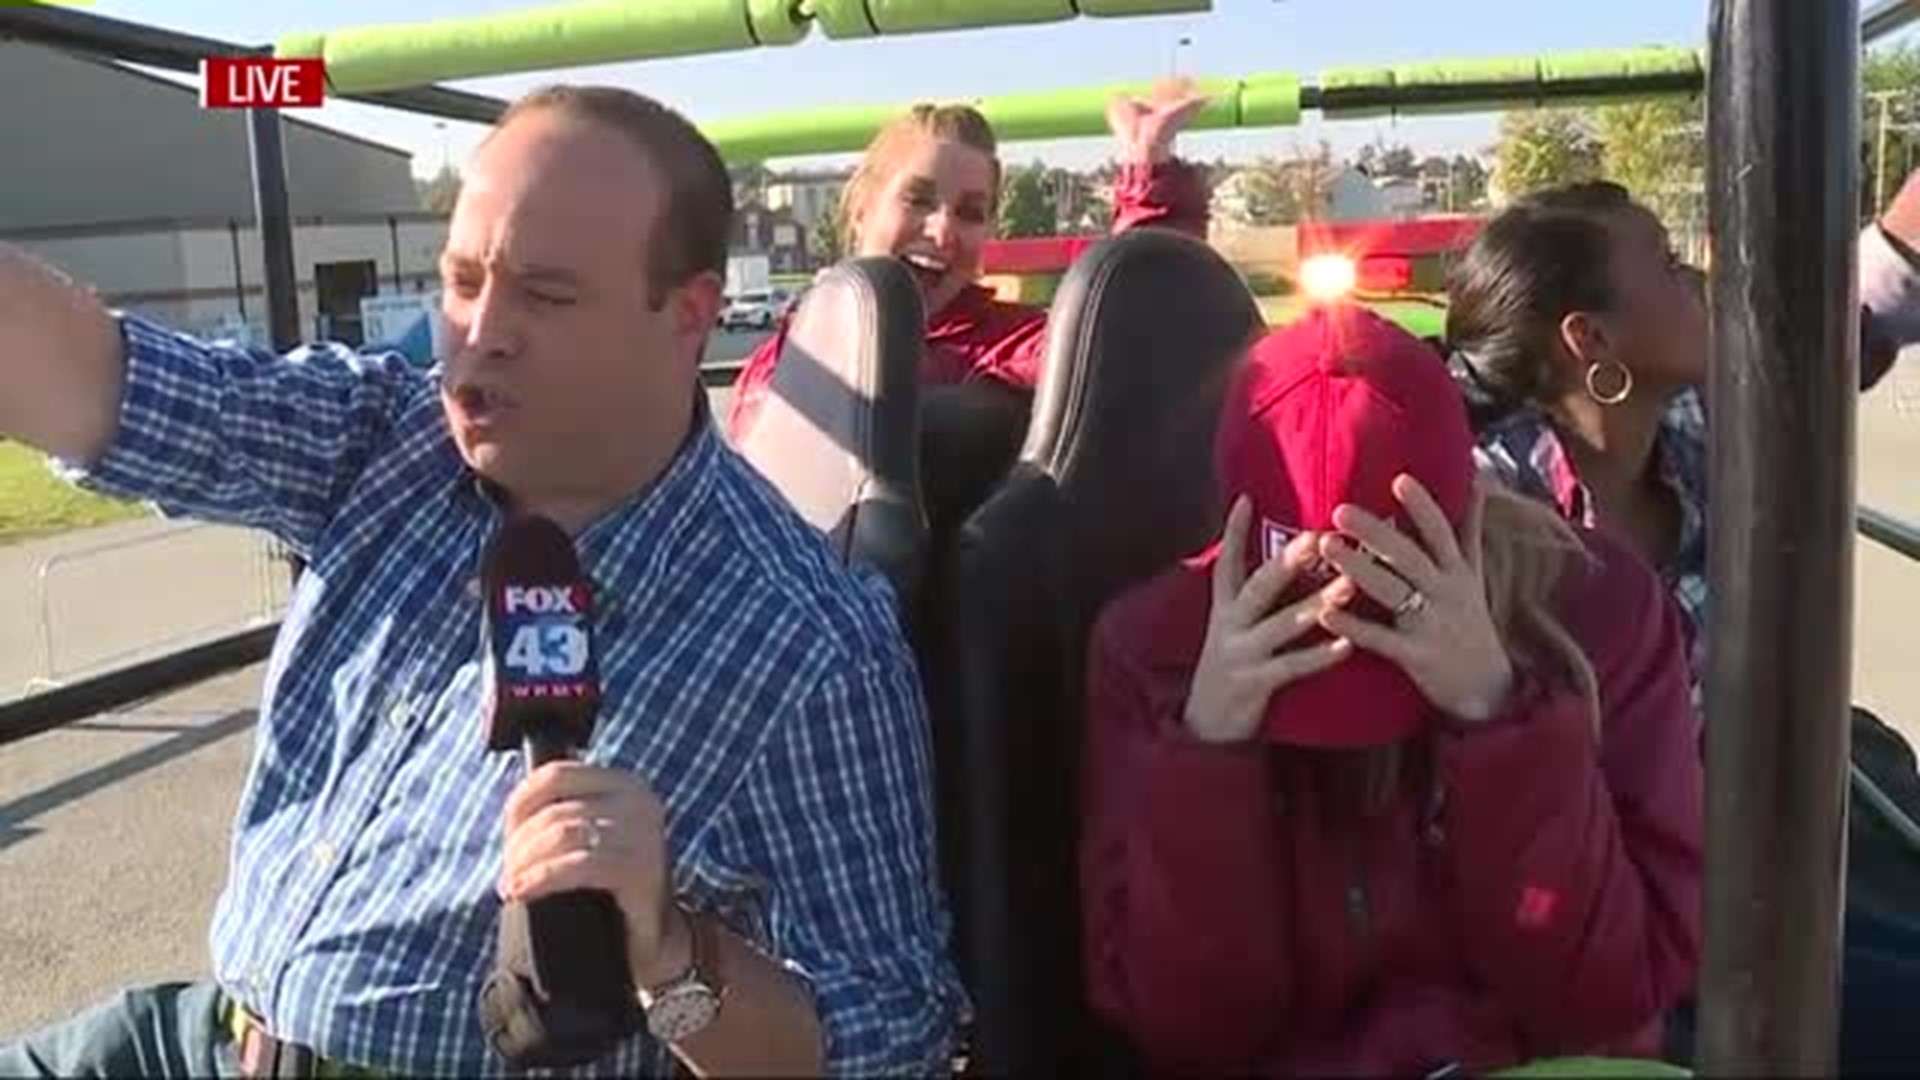 FOX43 Morning News takes a monster truck ride